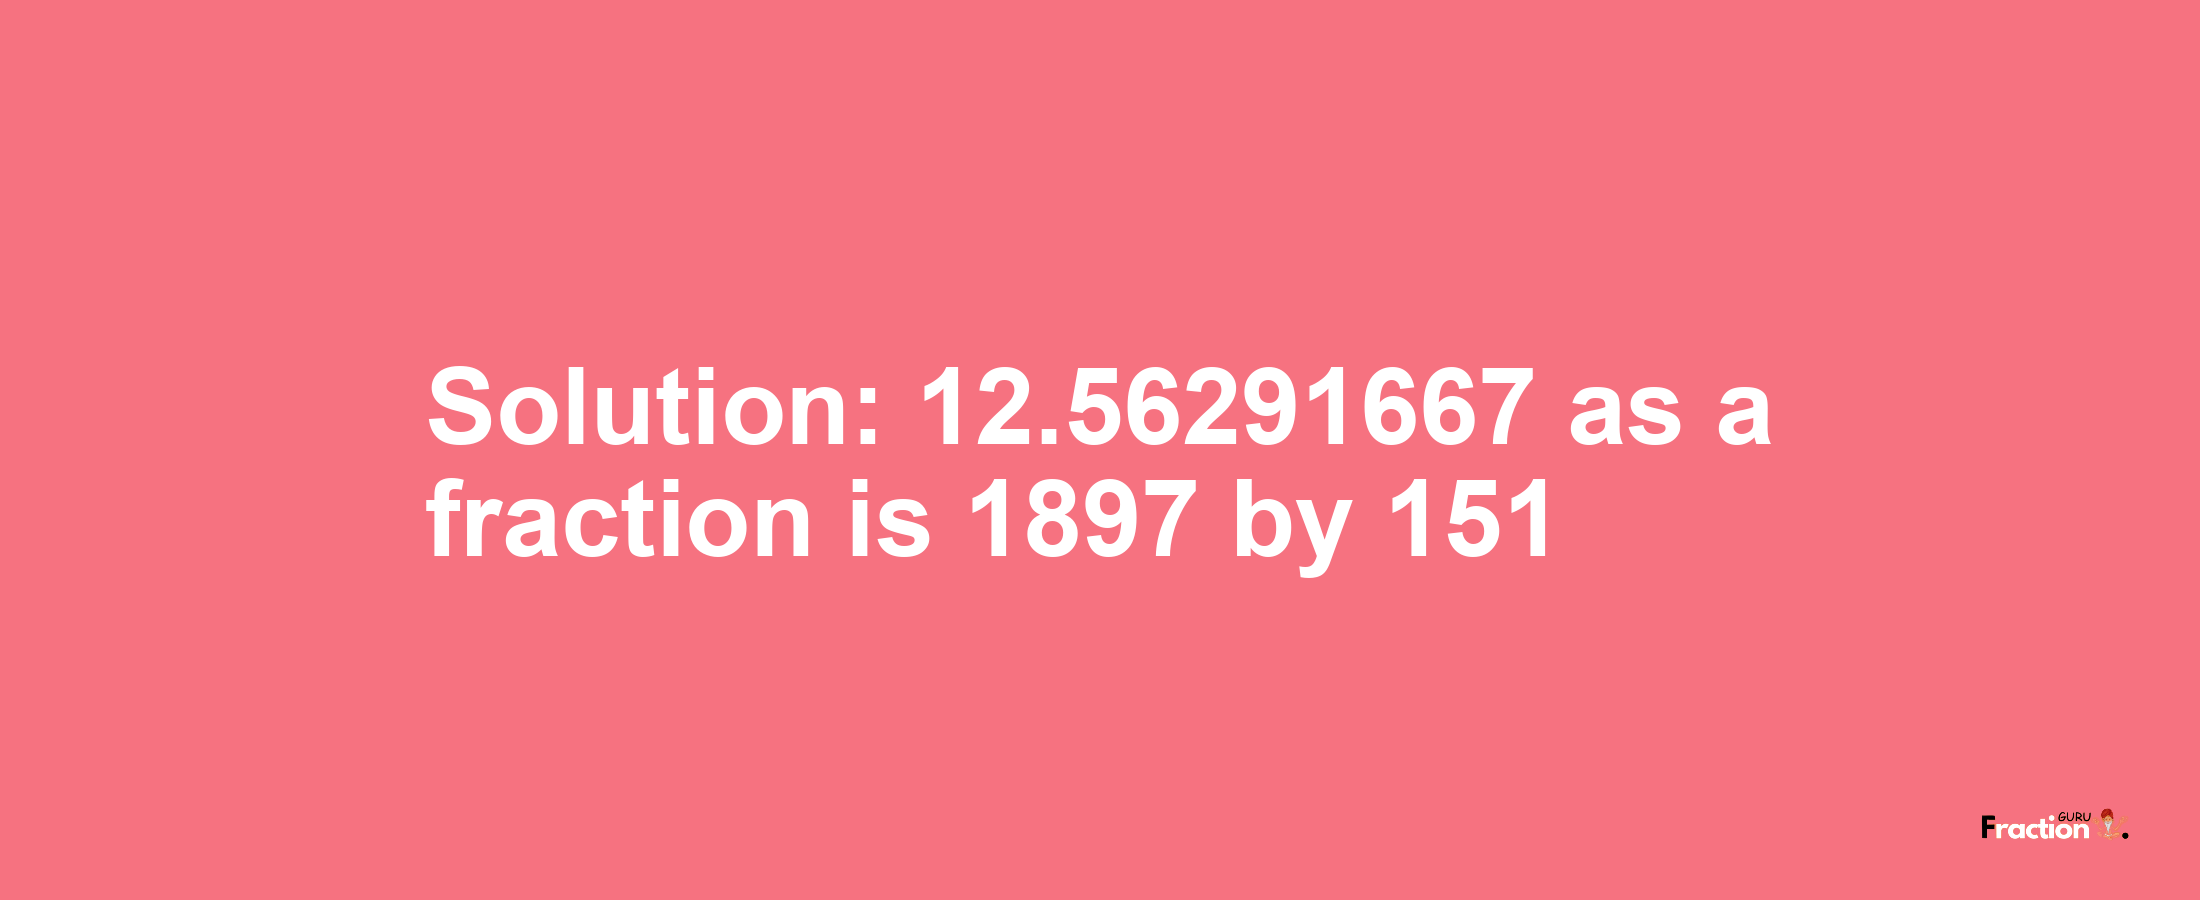 Solution:12.56291667 as a fraction is 1897/151